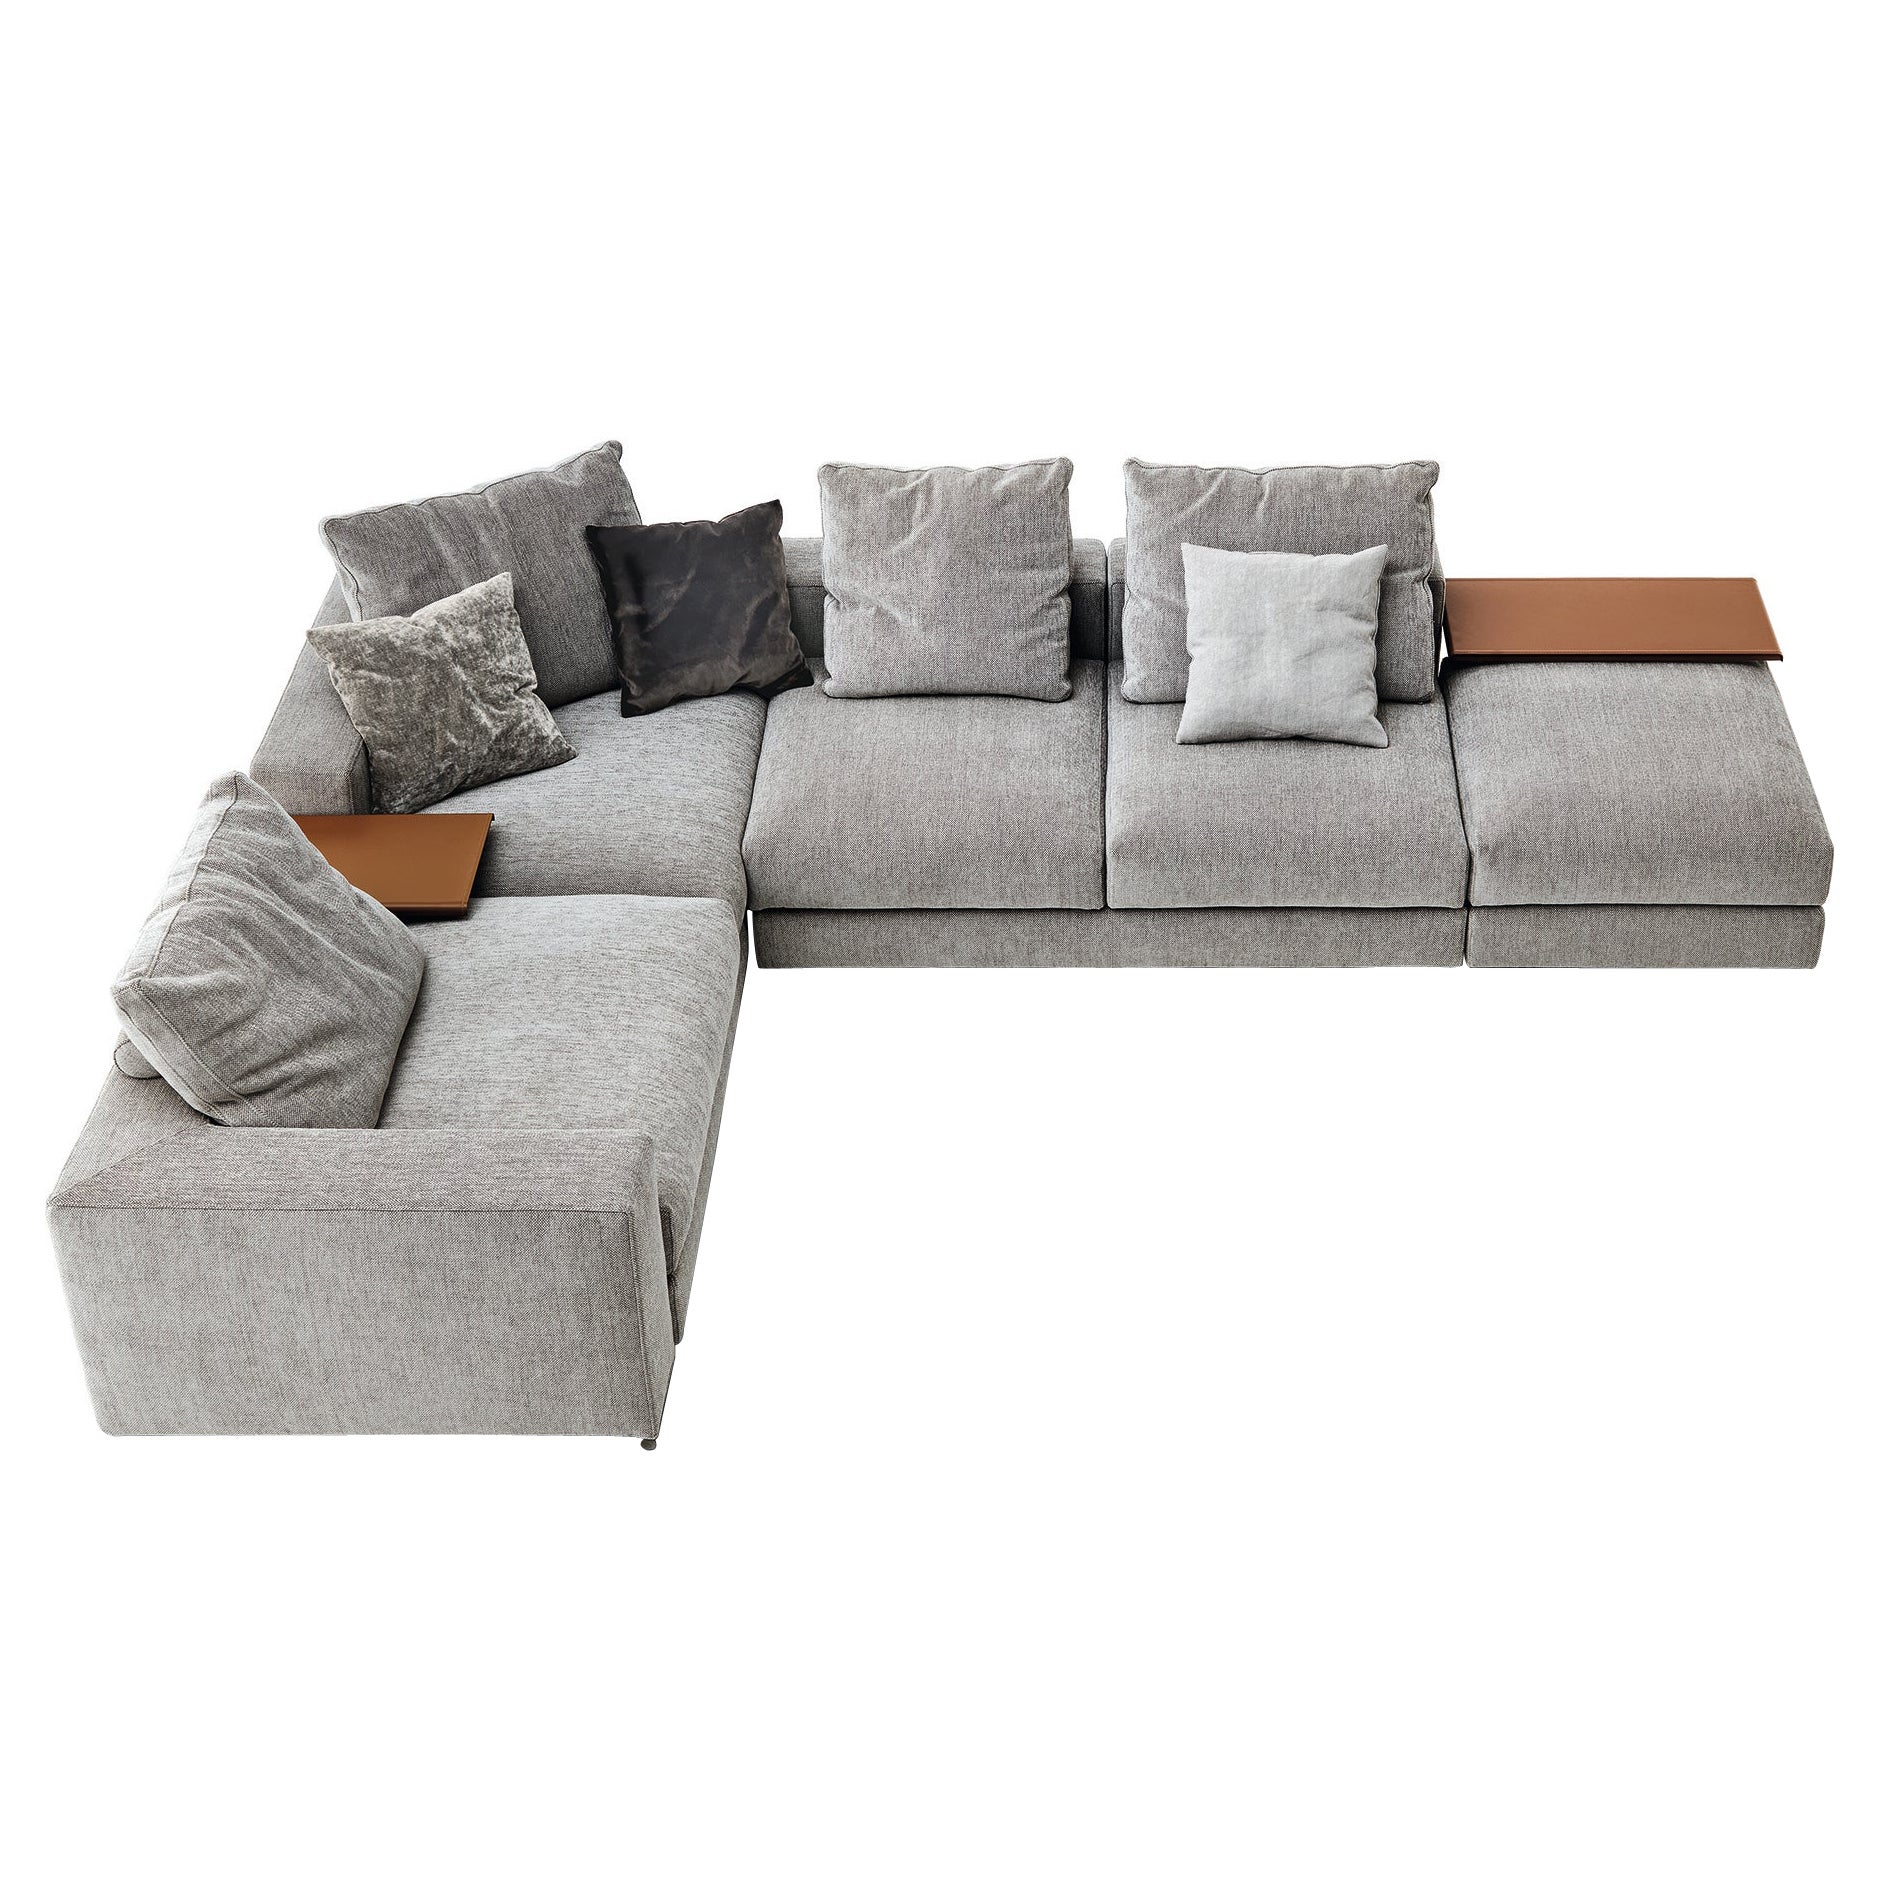 Ananta Class 23 Medium Sofa in Lusso Upholstery & Black Nickel by Sergio Bicego For Sale